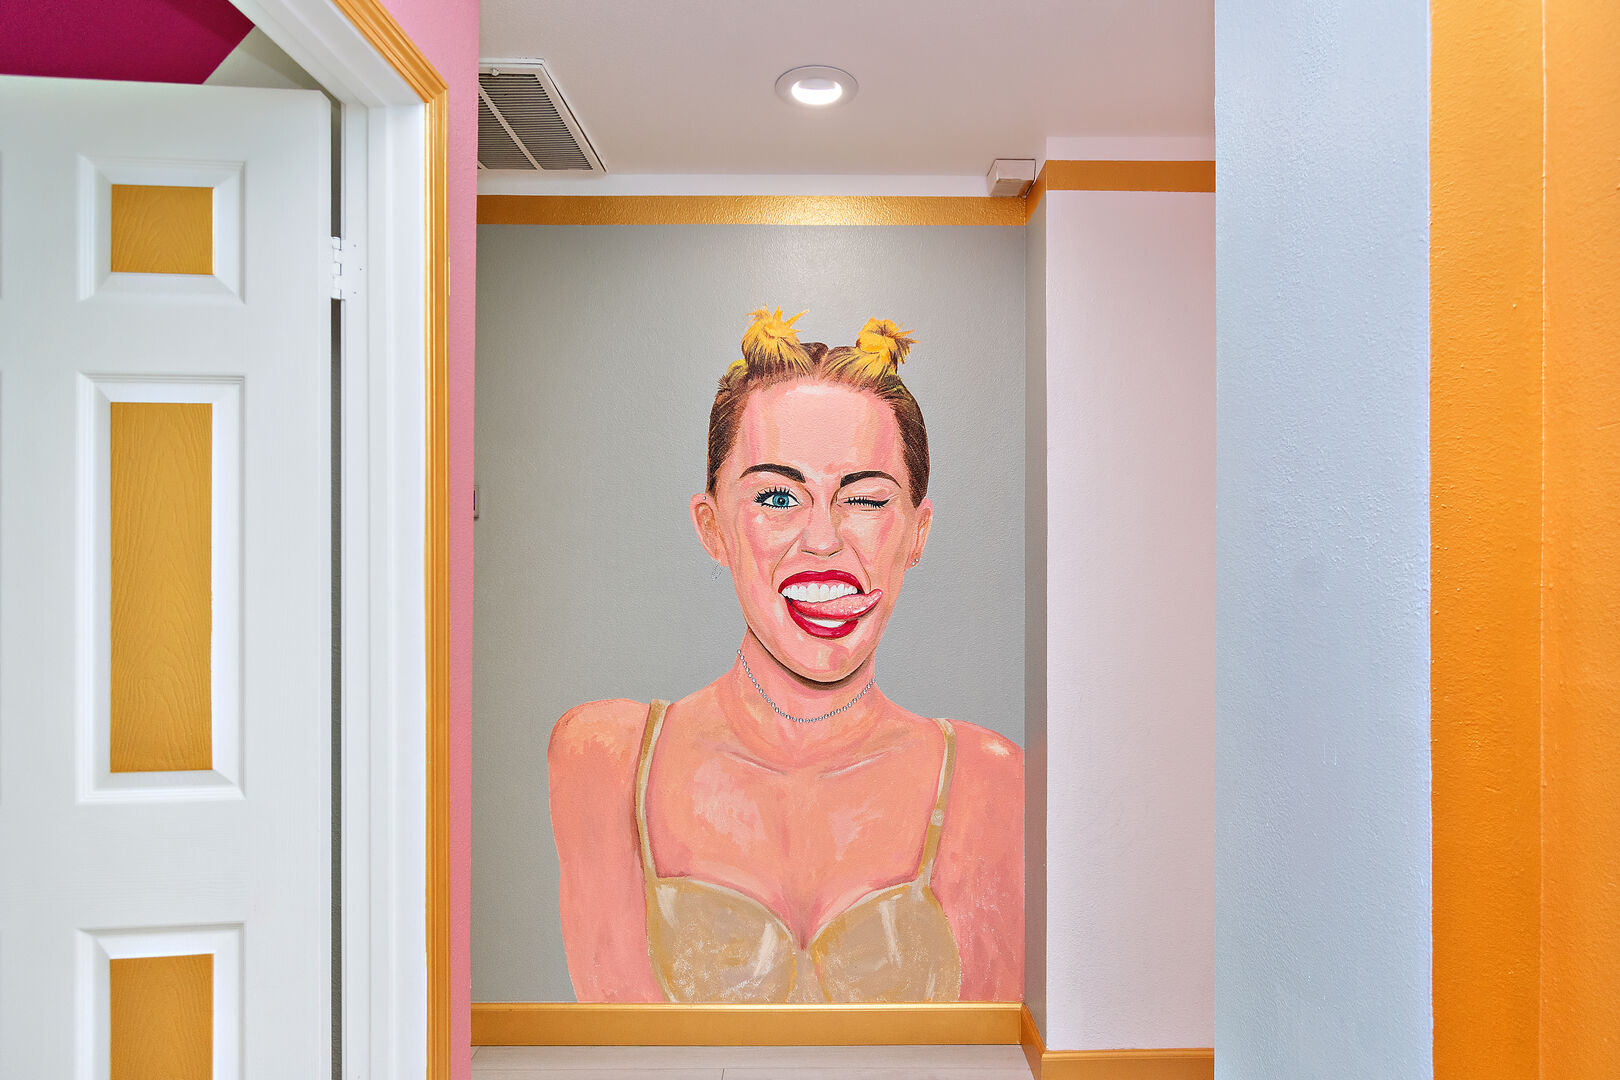 A delightful Miley Cyrus mural greets you as you stroll down the hallway.